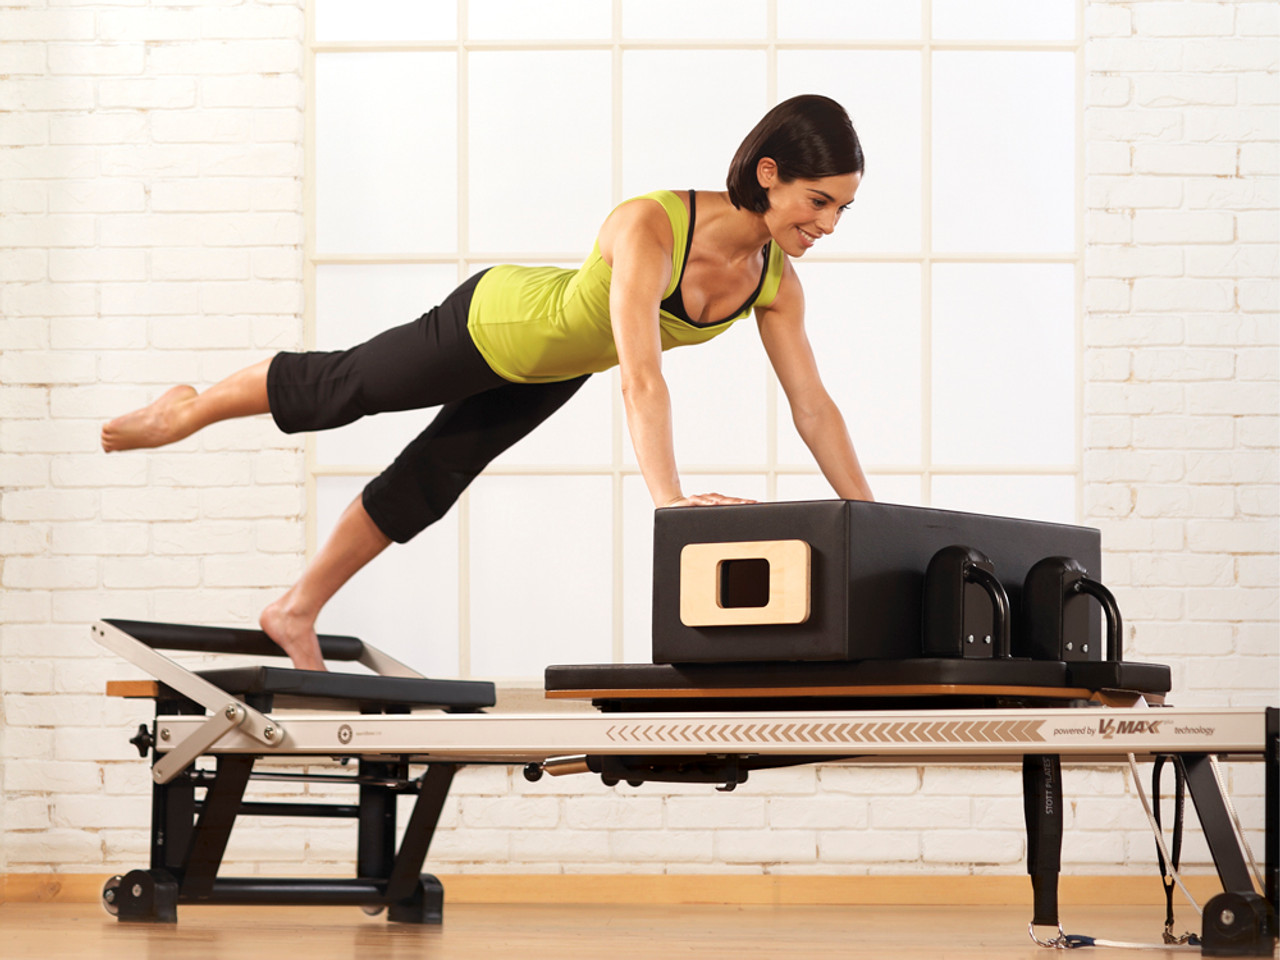 Athletic Conditioning V2 Max Reformer 2: DVD for Pilates